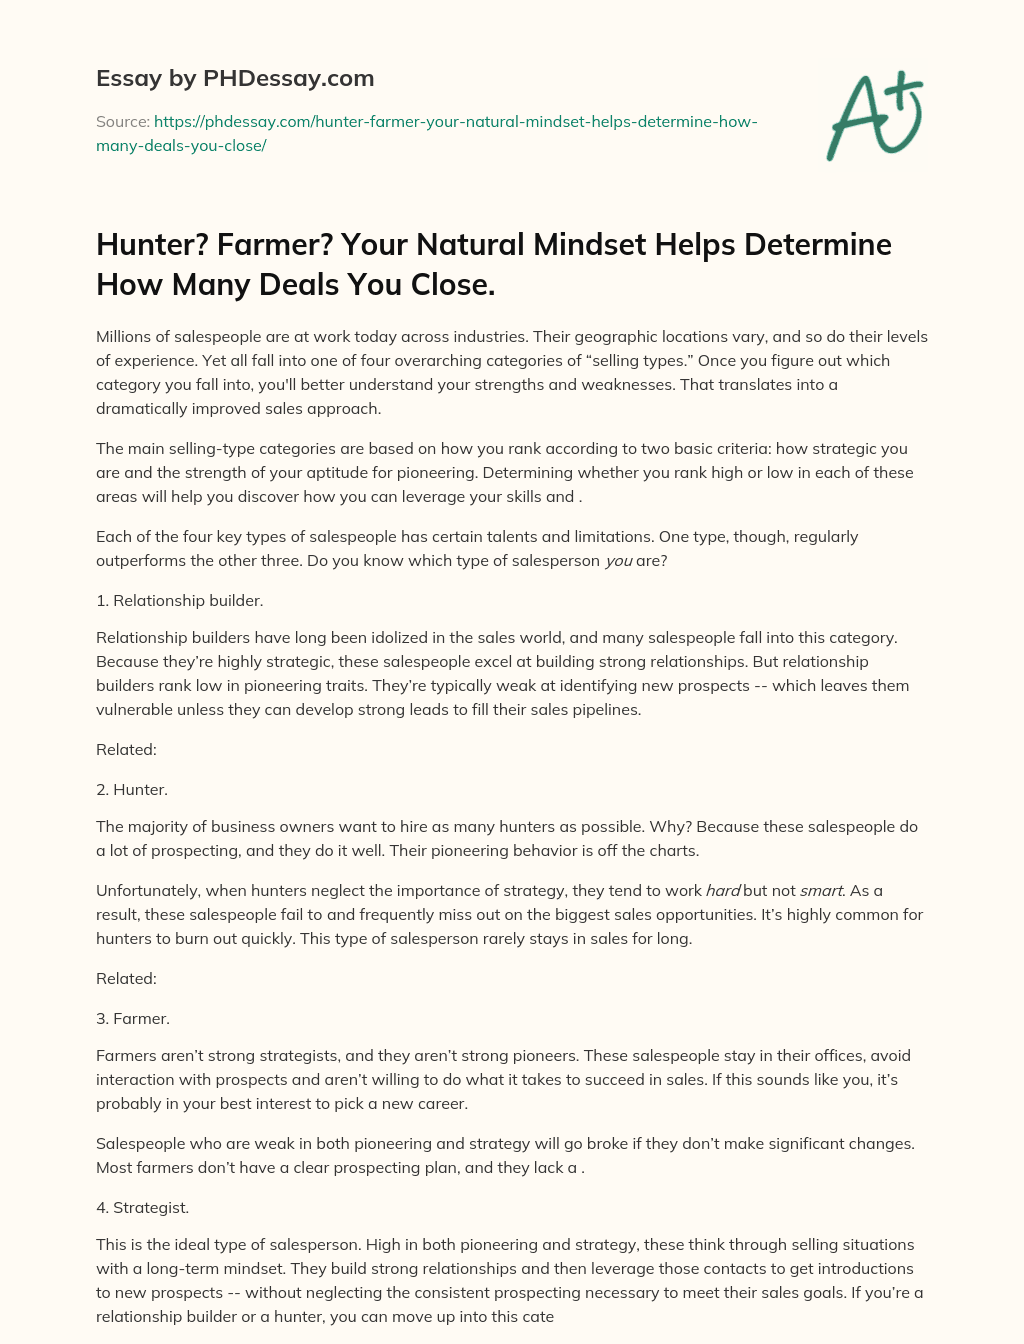 Hunter? Farmer? Your Natural Mindset Helps Determine How Many Deals You Close. essay